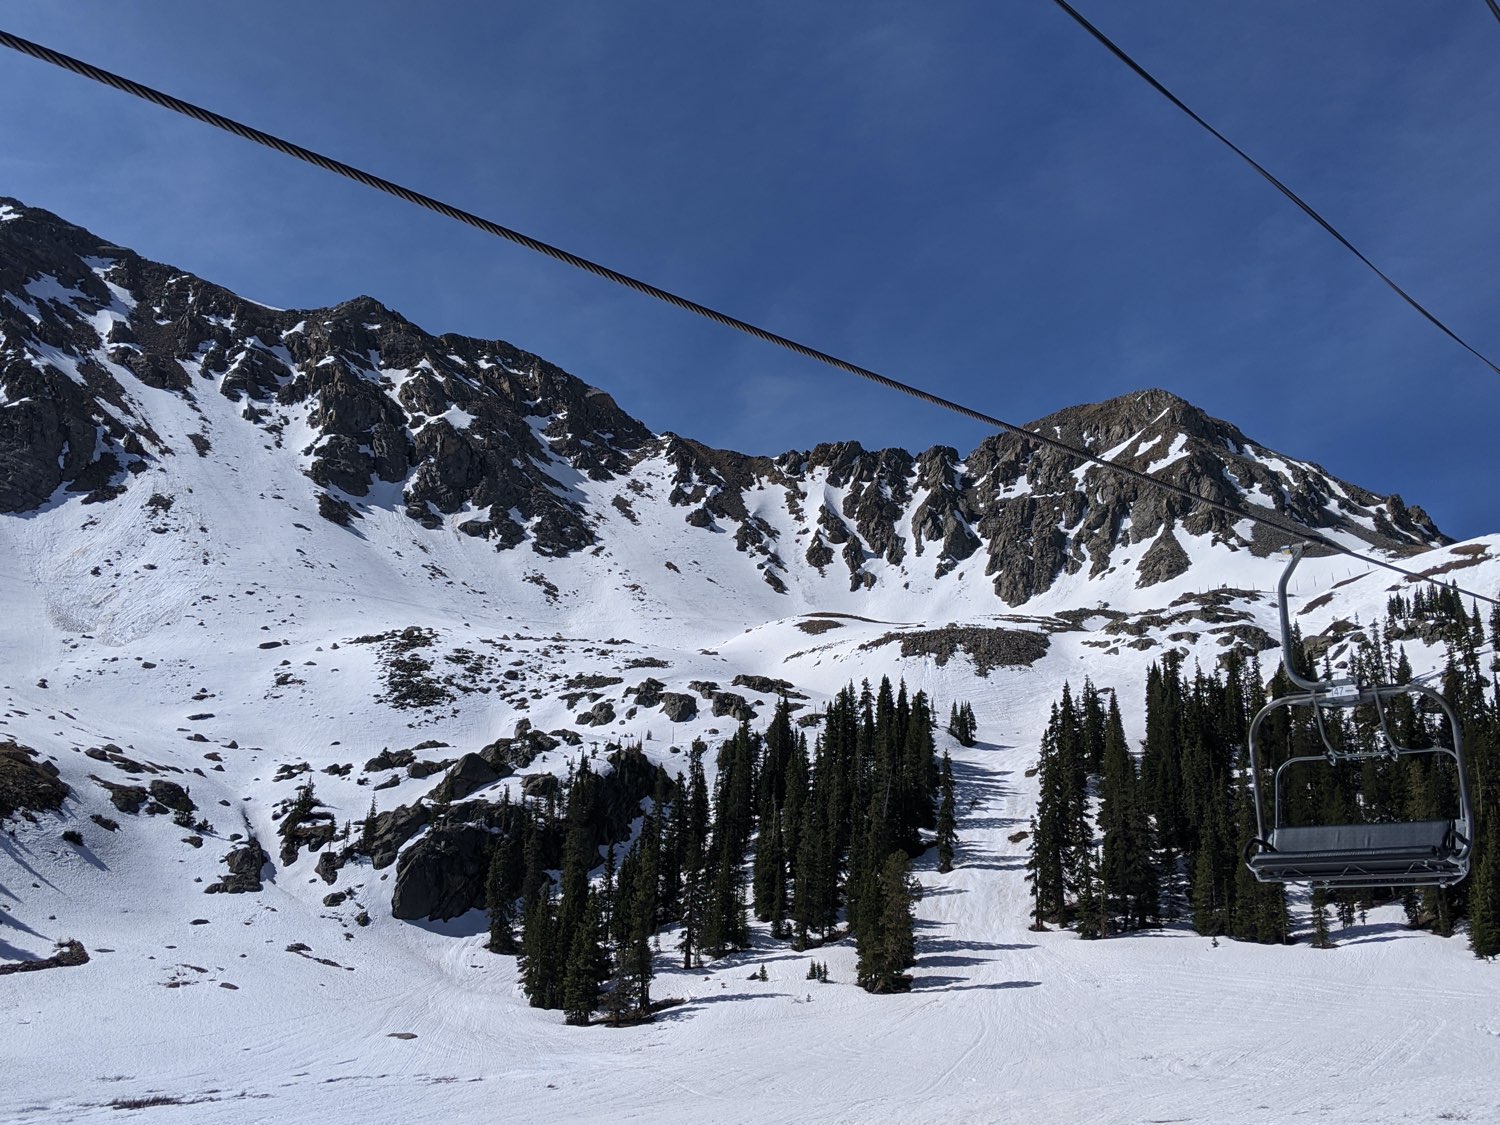 Pandemic Skiing at A-Basin: What was it like?  A Ski Diva fills us in.